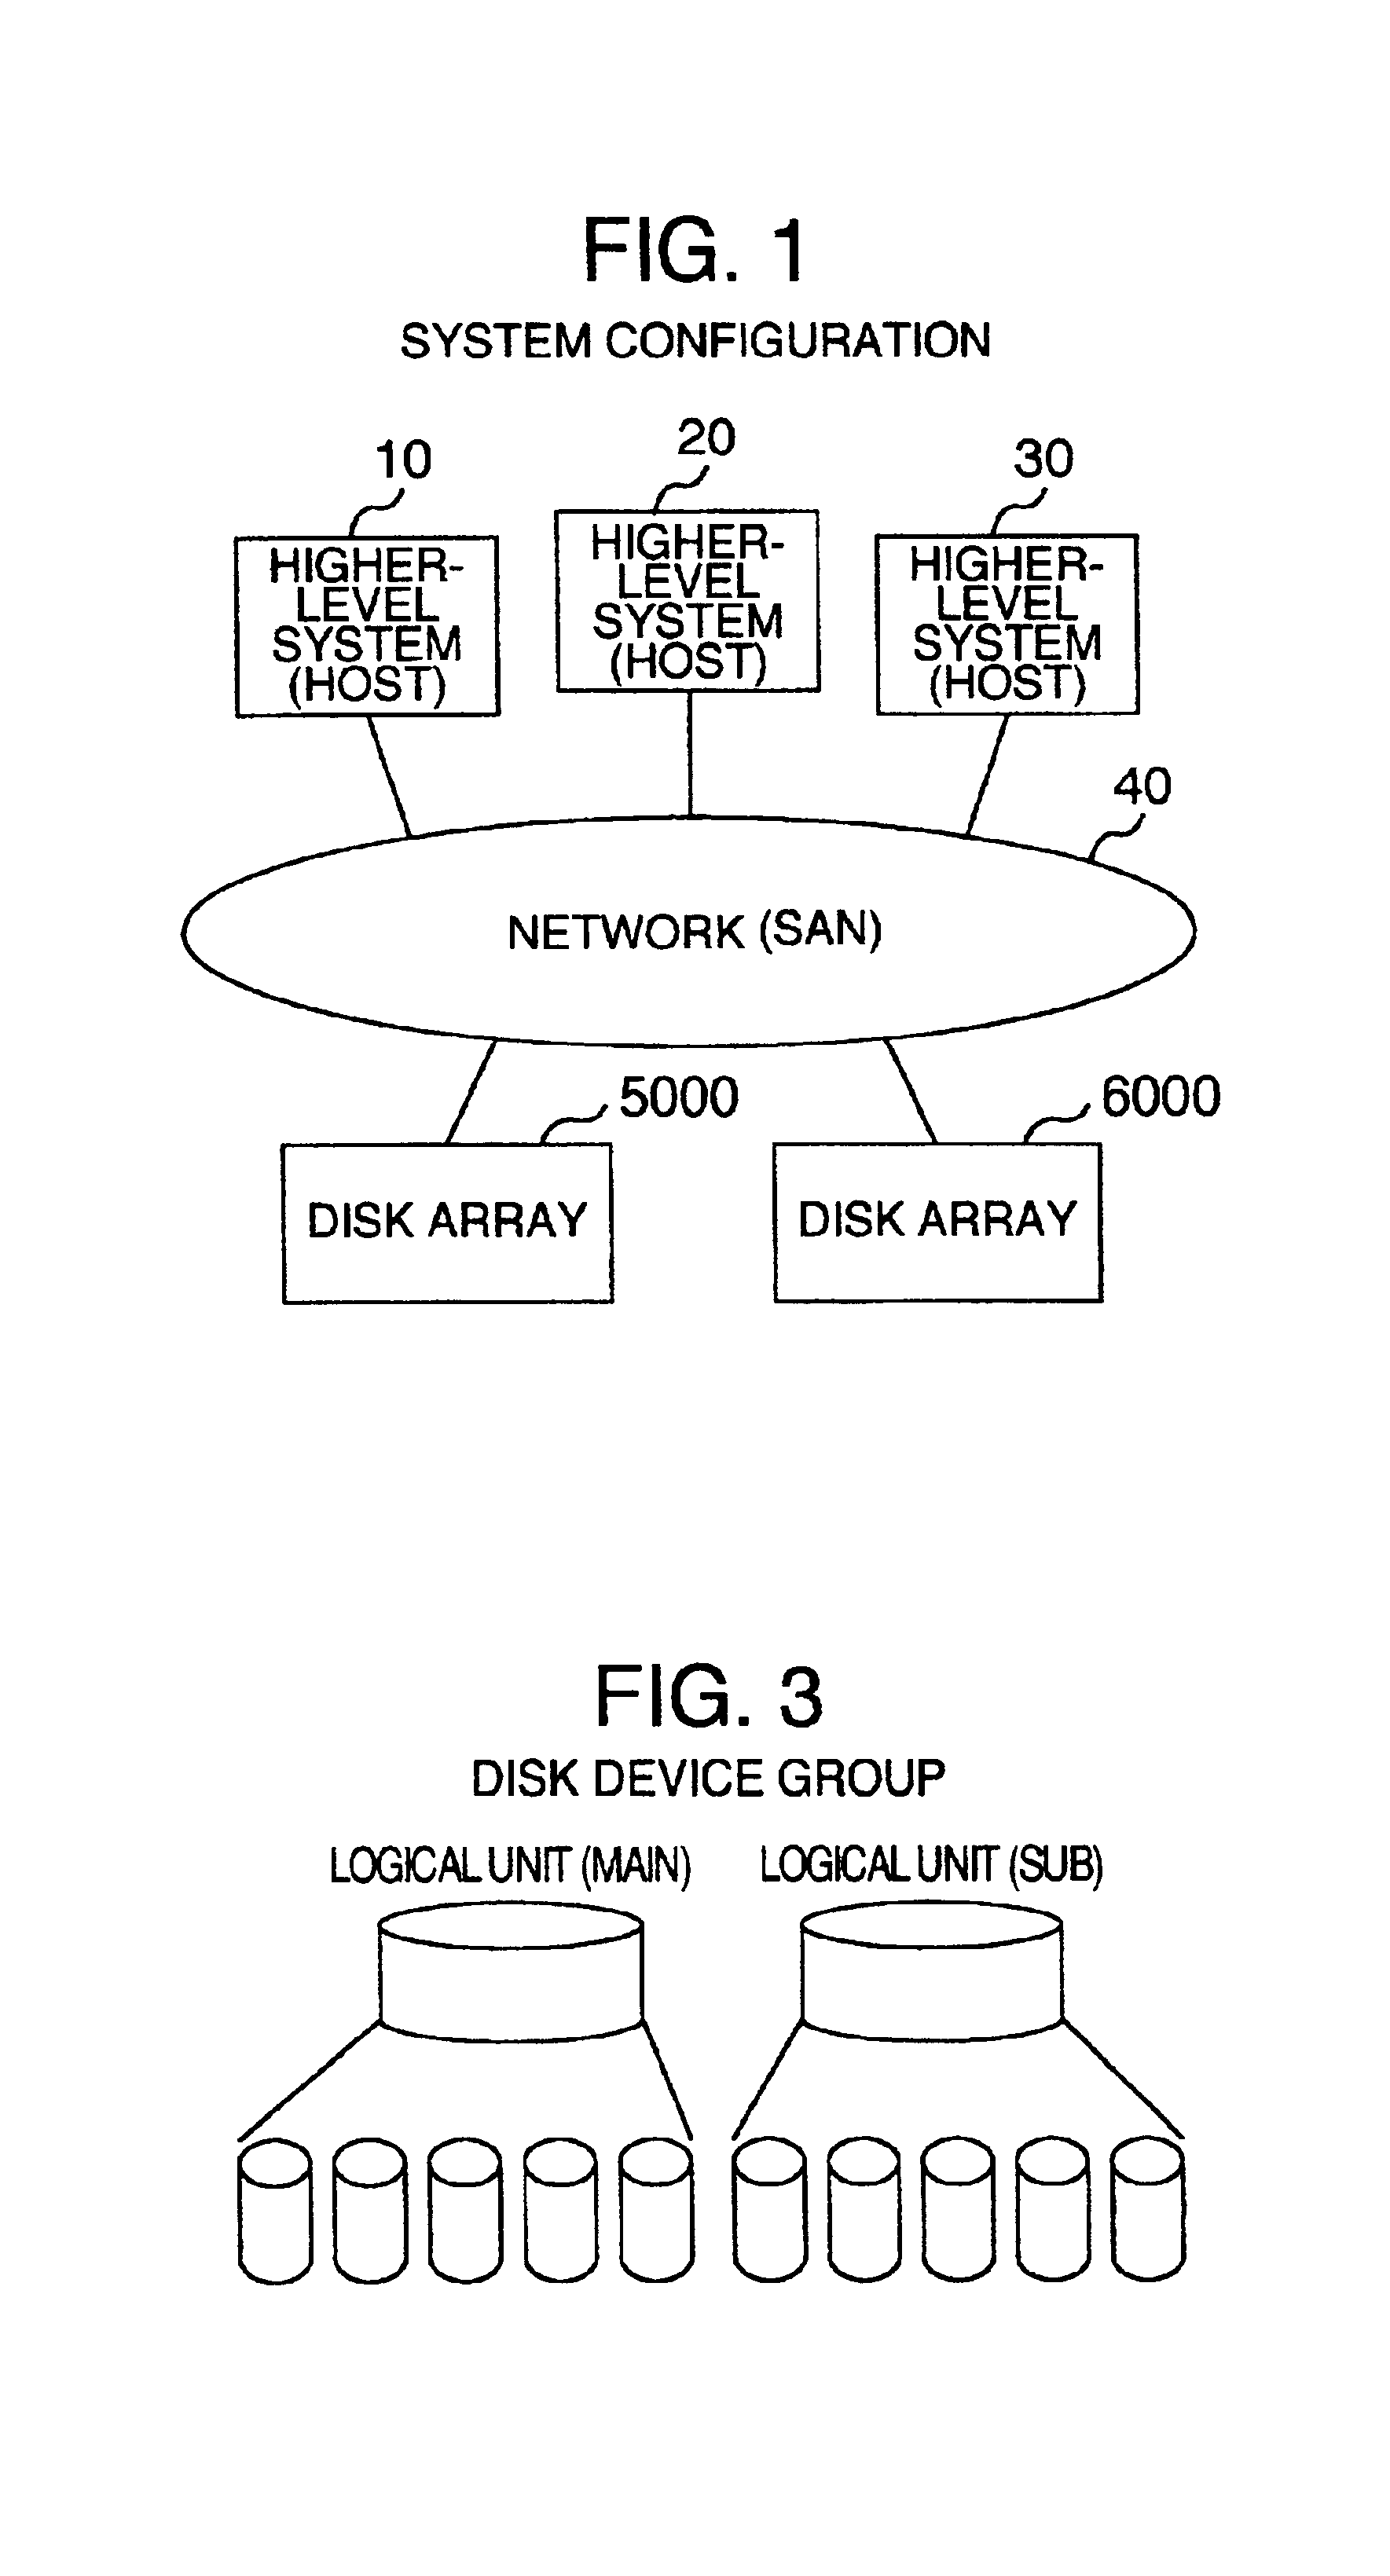 Storage subsystem that connects fiber channel and supports online backup